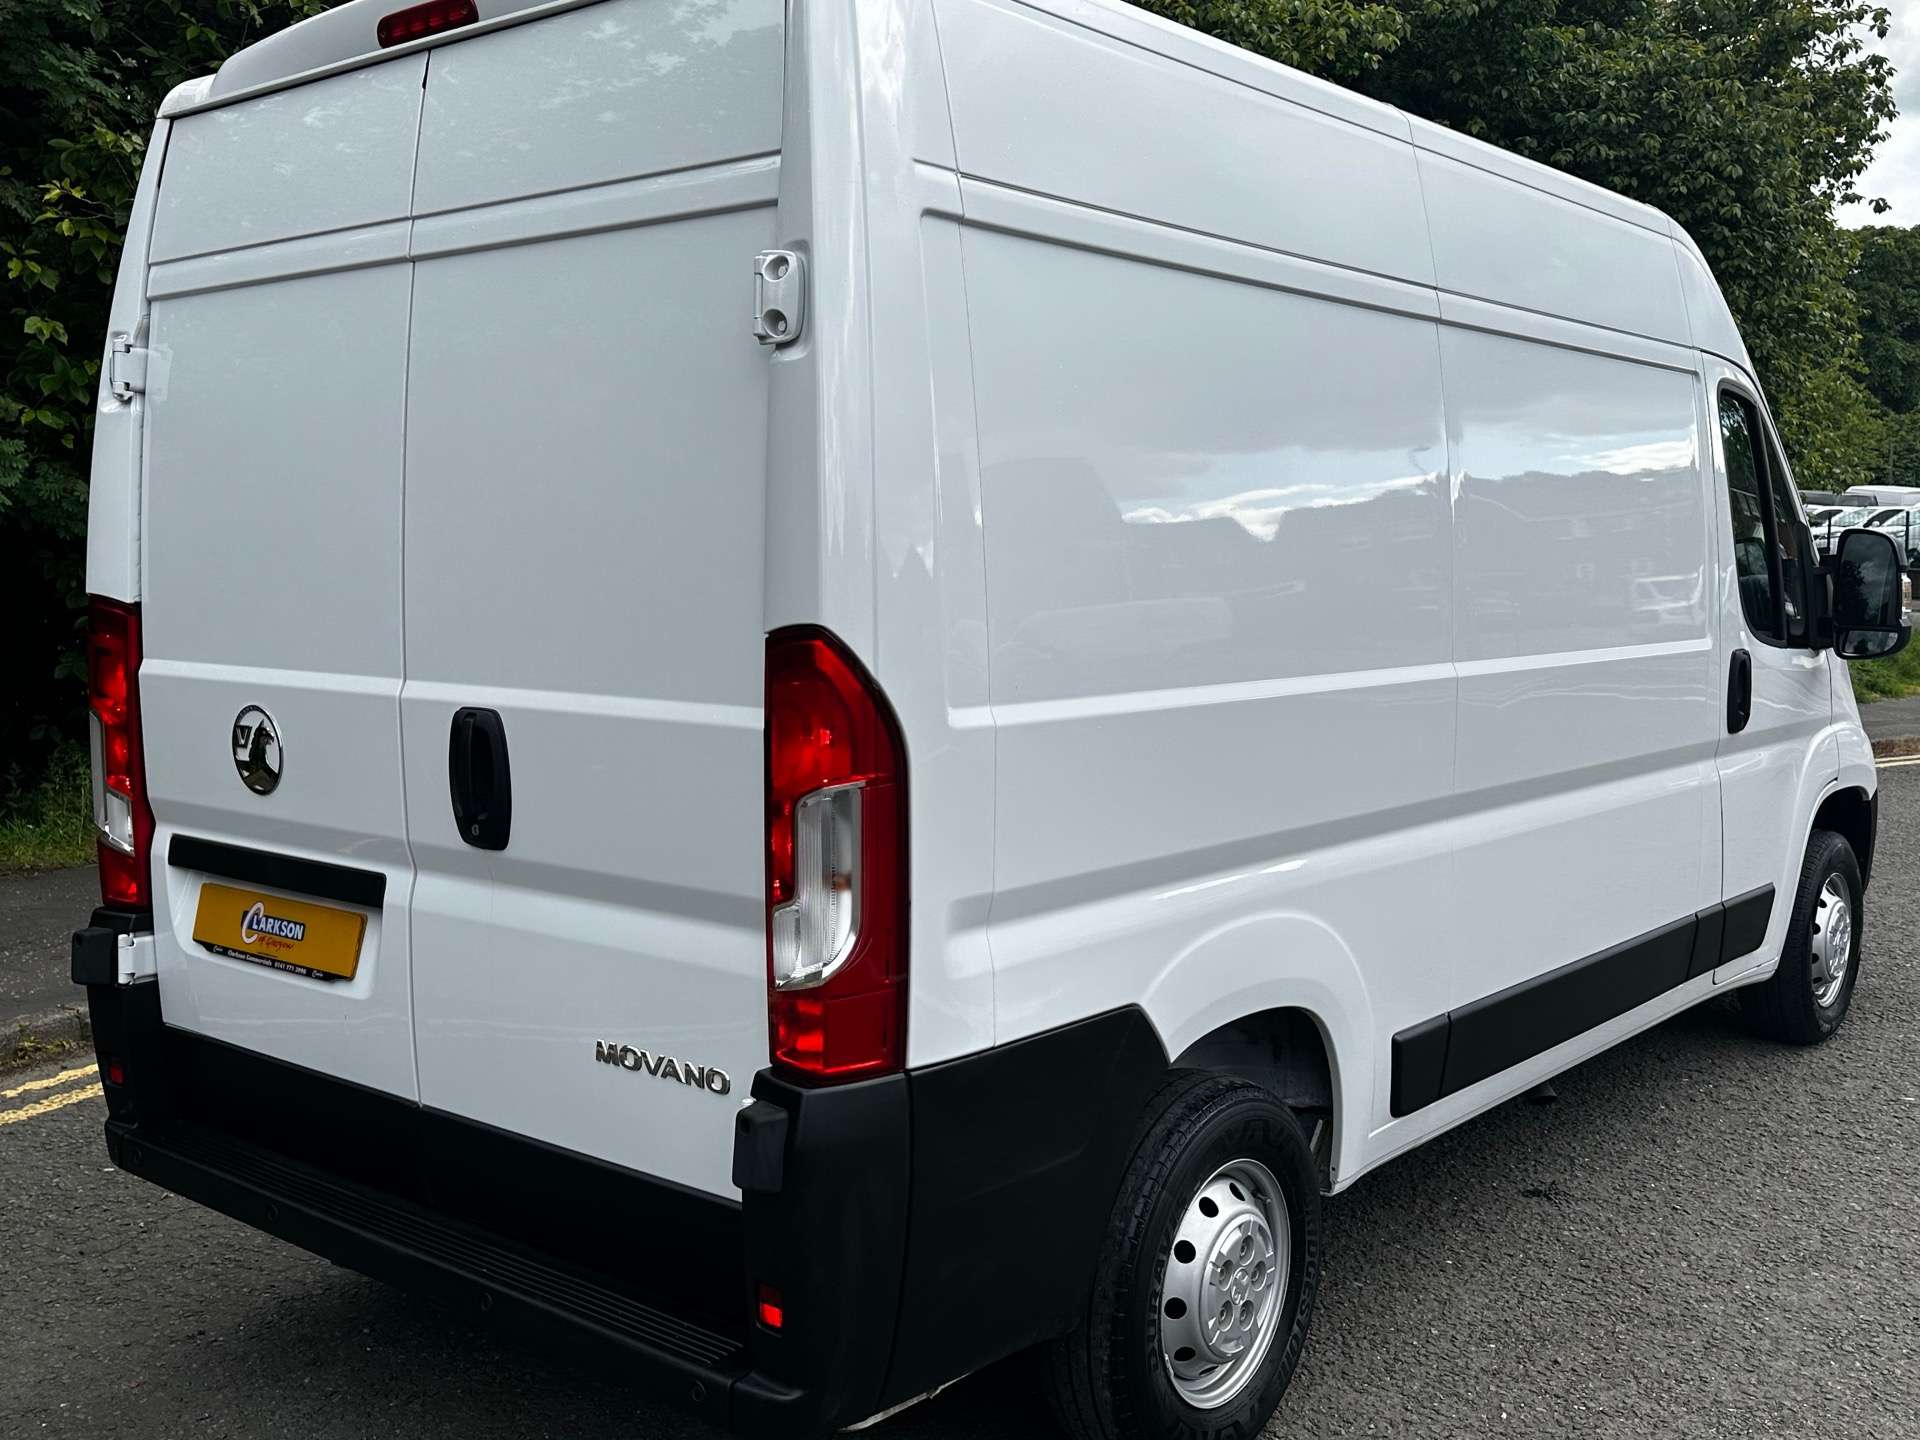 VAUXHALL MOVANO 2.2 Movano L2H2 F3500 Prime T D SS #3